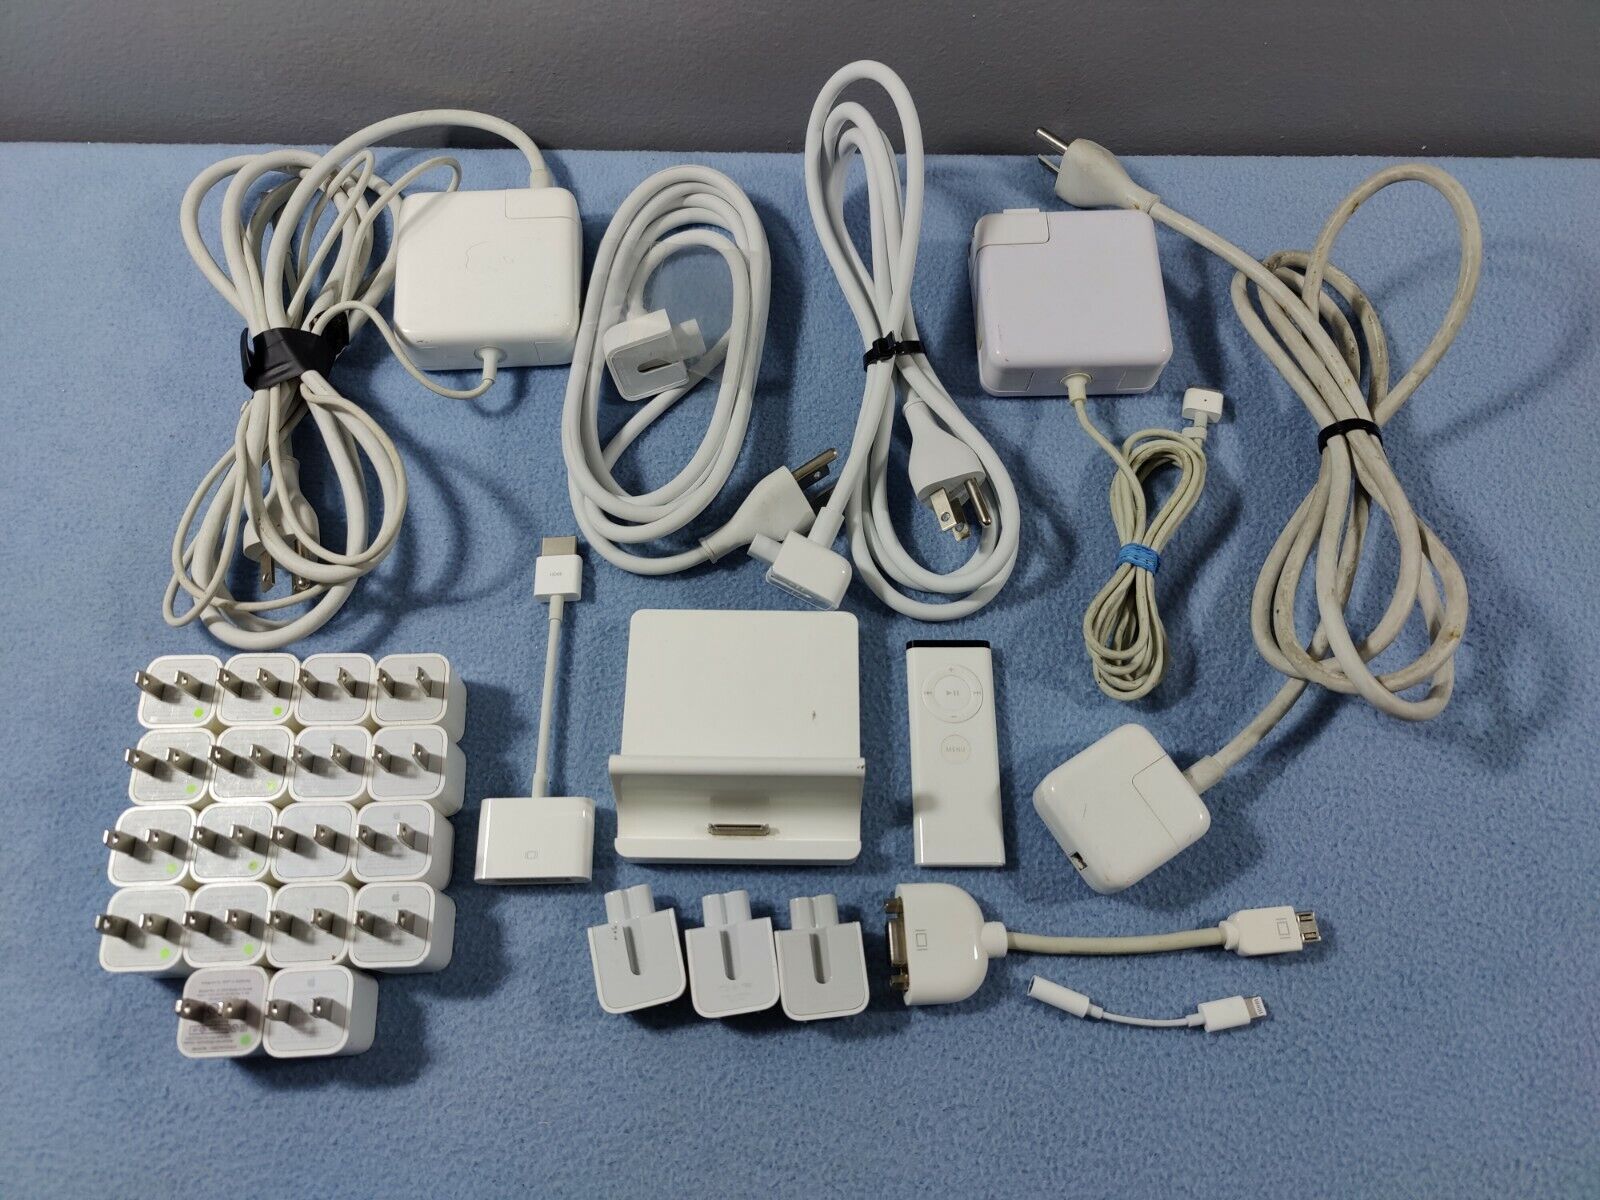 HUGE APPLE ACCESSORIES LOT OEM POWER CORDS ADAPTERS REMOTE DOCKING STATION READ